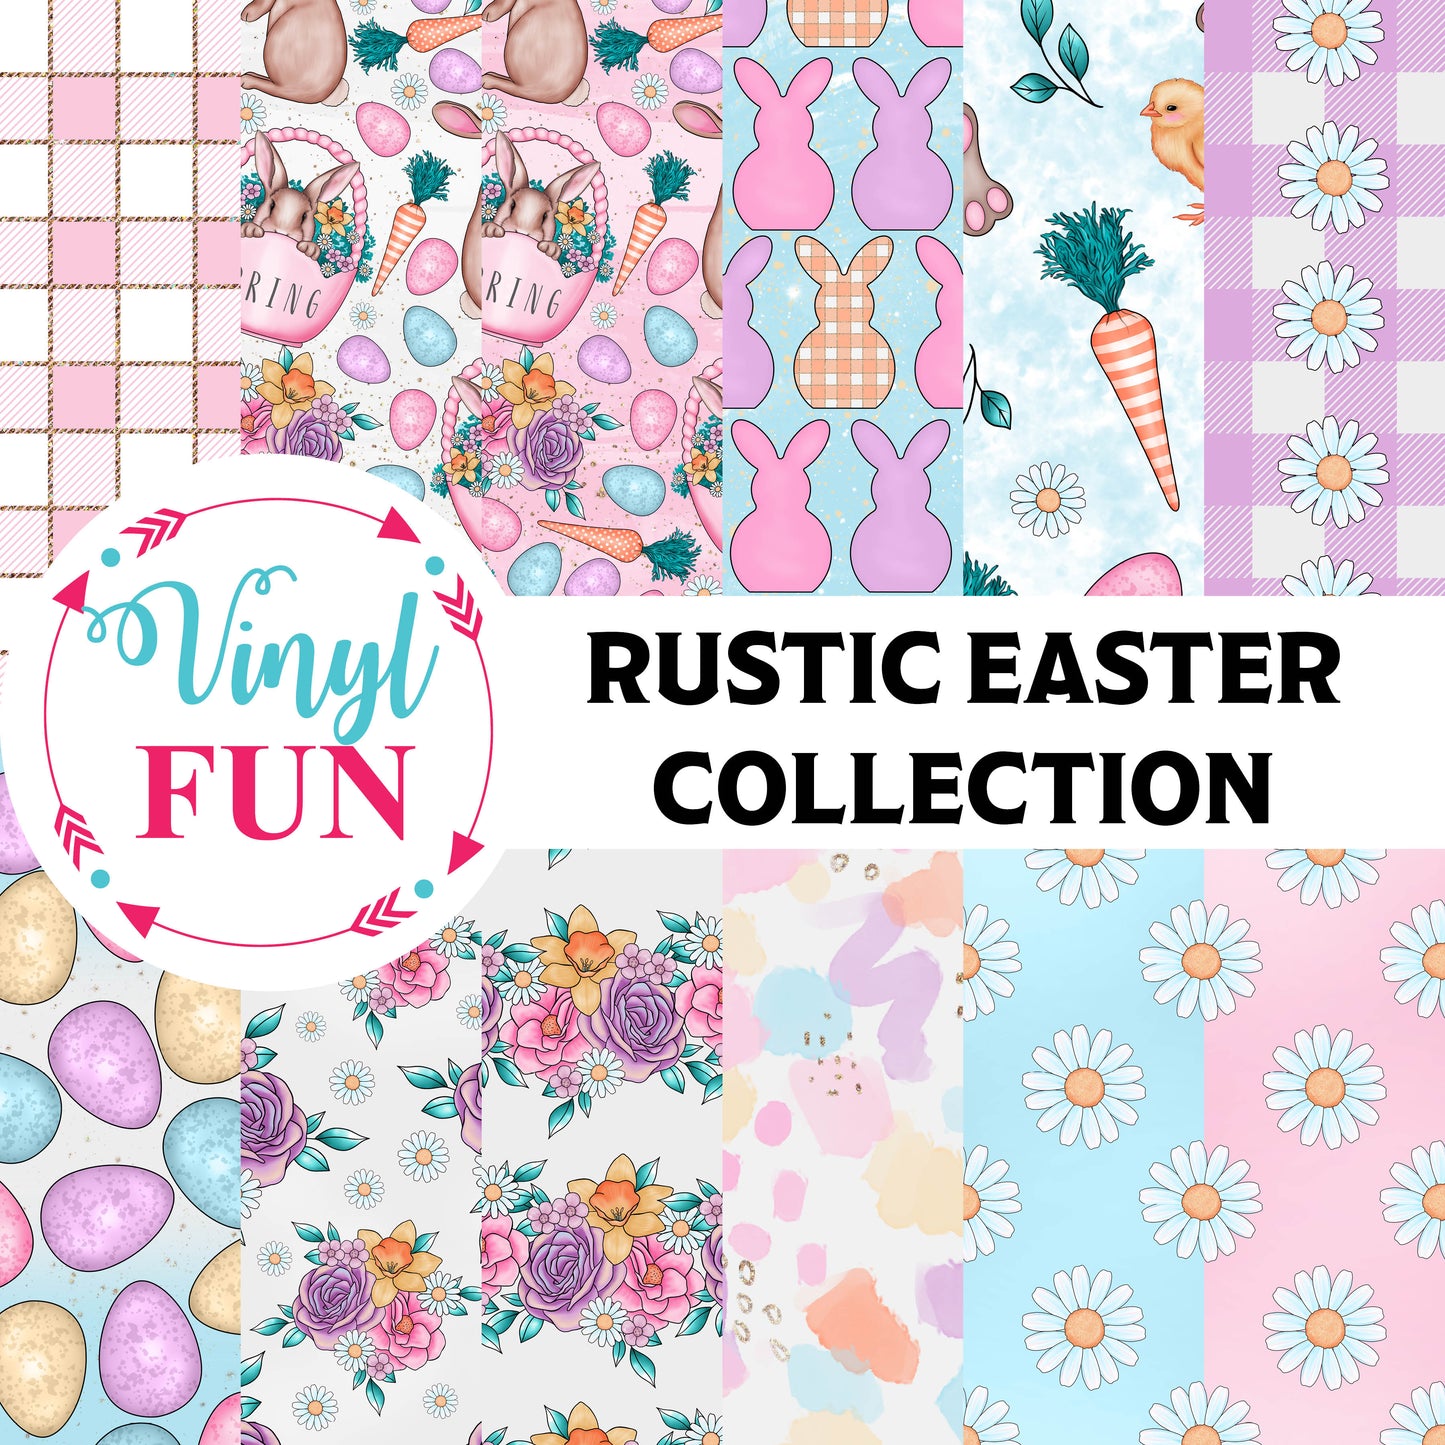 Rustic Easter Collection